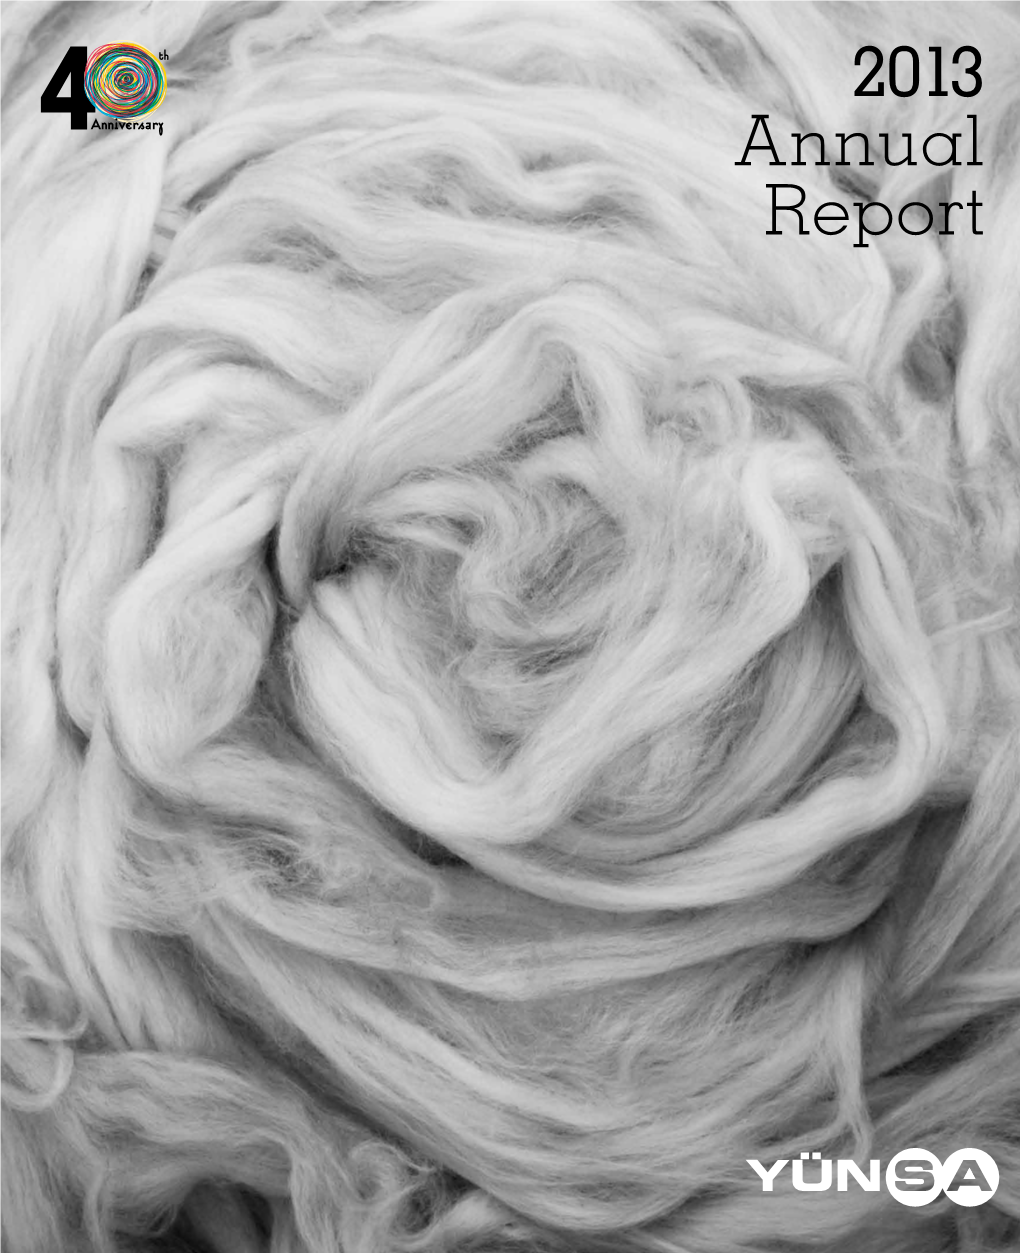 2013 Annual Report 2 3 We Turn Great Fabrics Into Work of Art with Aesthetic Touches, Since the First Day That We Founded